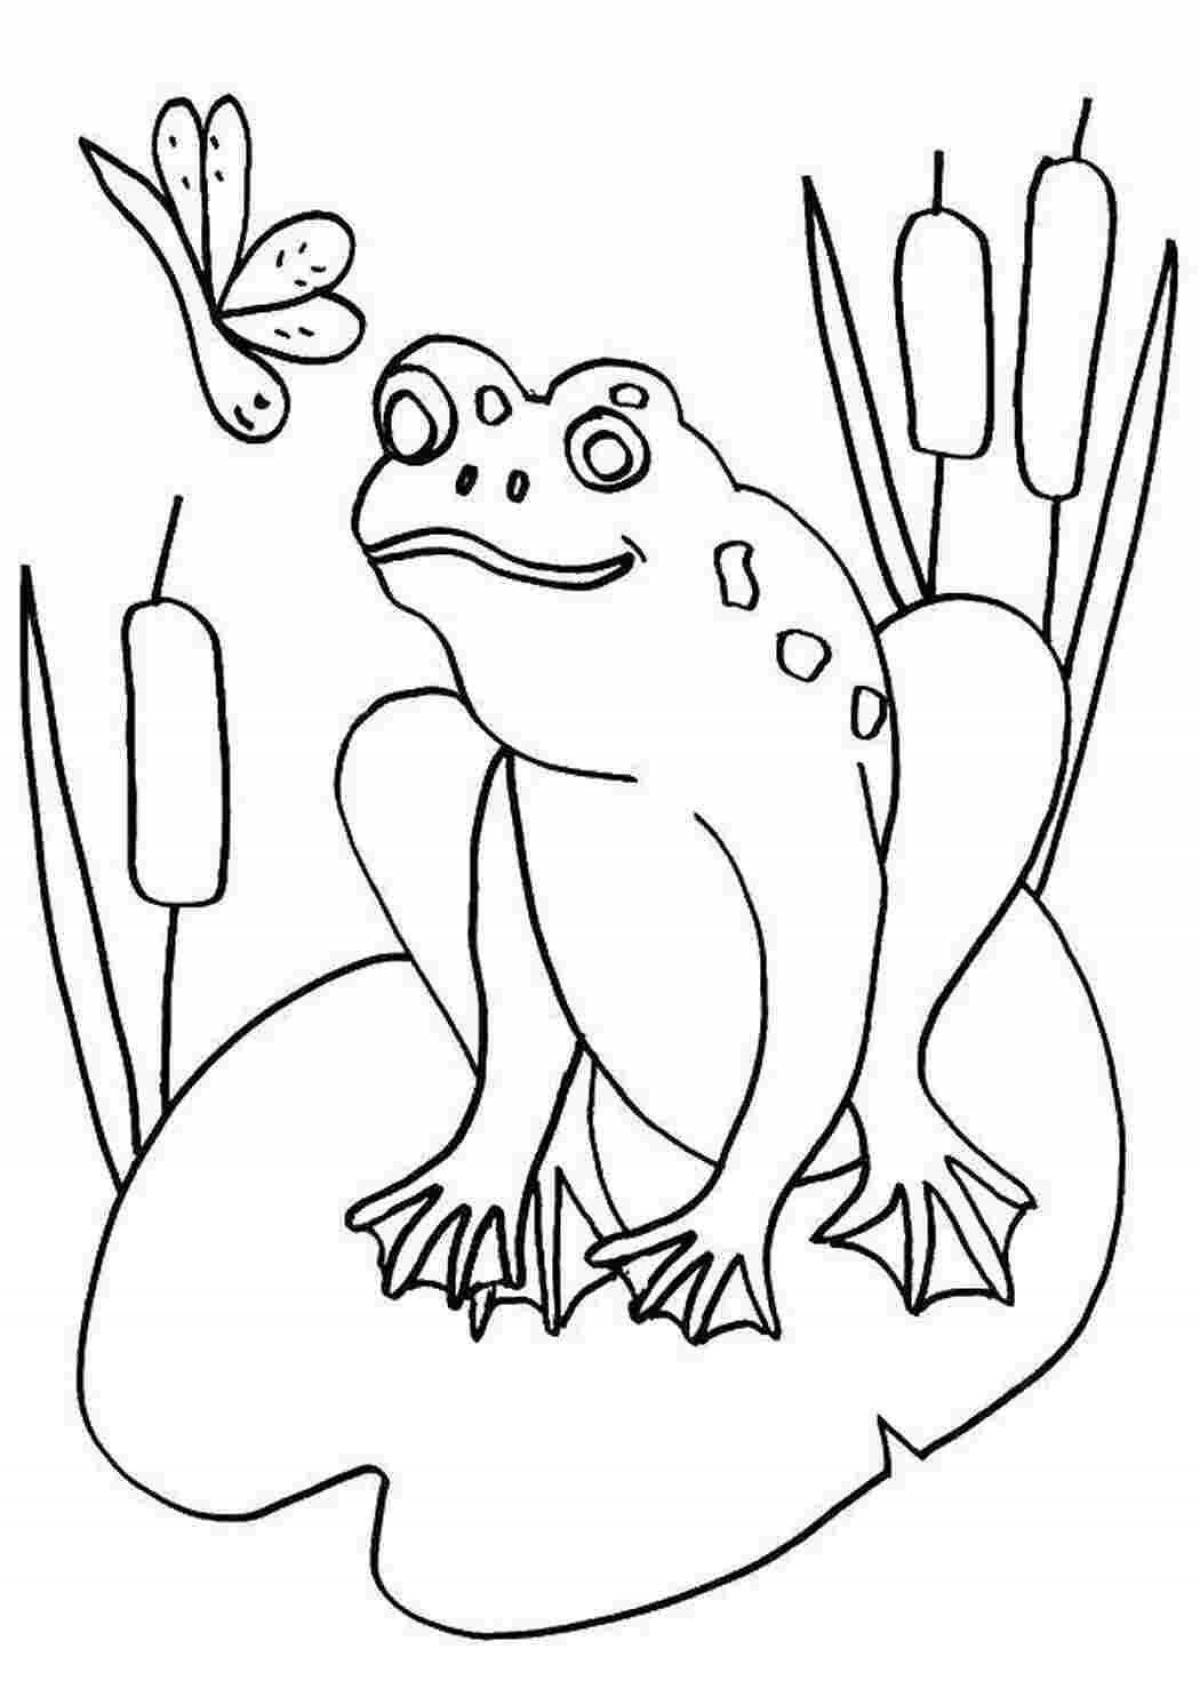 Coloring book funny traveler frog